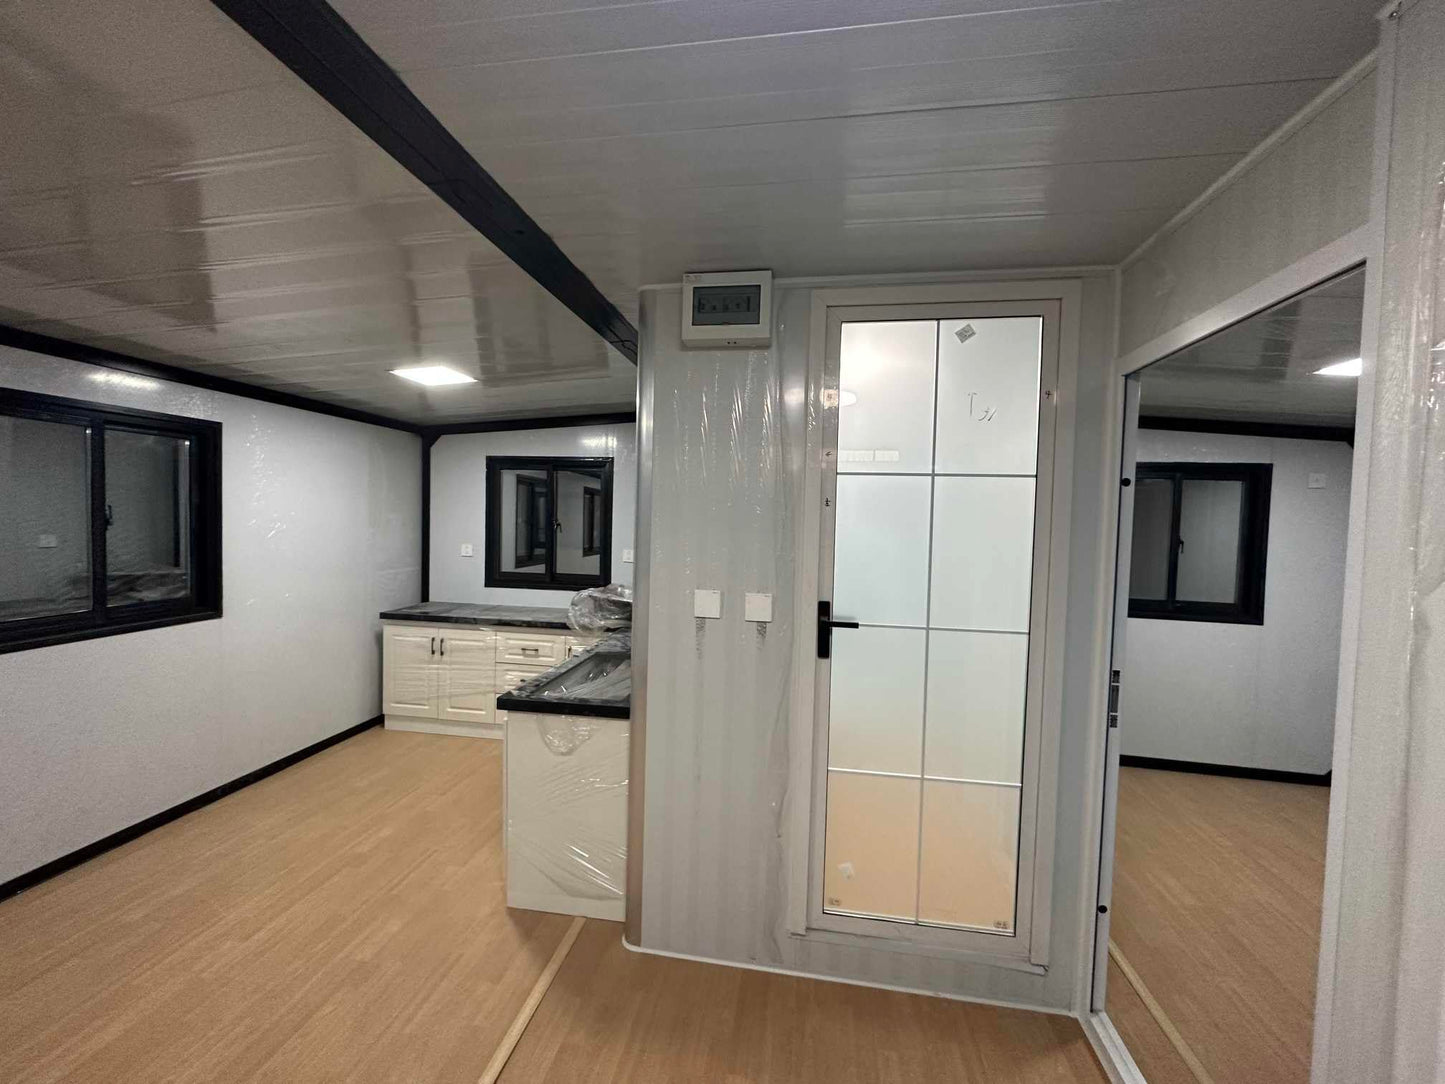 20ft - 40ft Portable Prefabricated Tiny House to Live in, Expandable Foldable House, Customizable Fully Equipped with Kitchen, Bathroom, Bedroom Mobile Home and Storage Shed Large Living Space